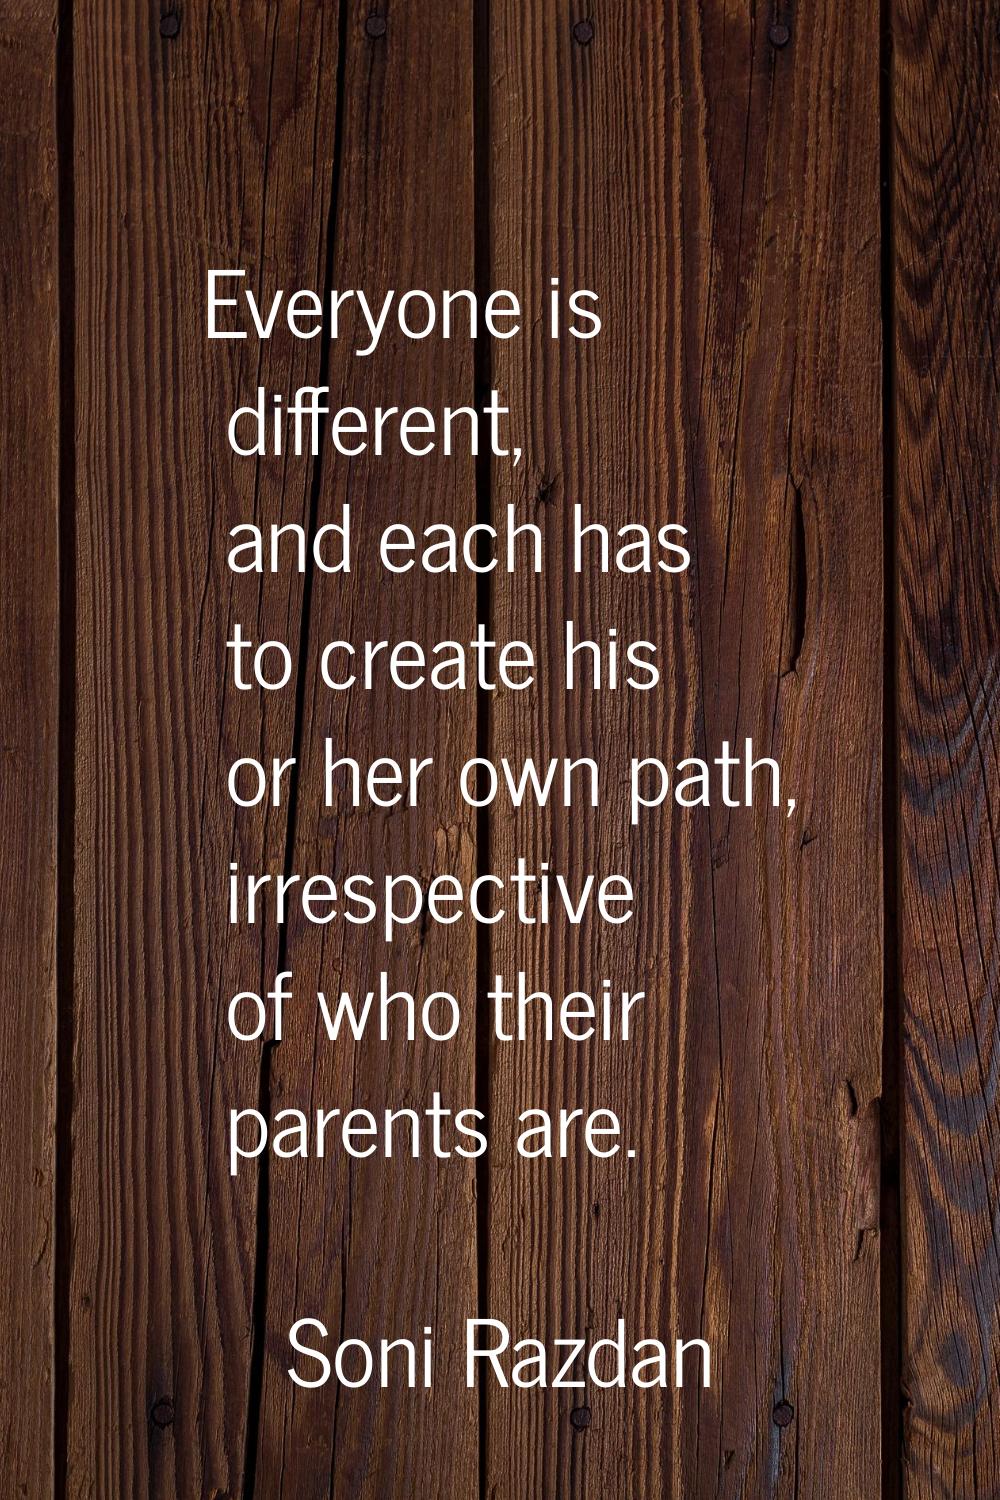 Everyone is different, and each has to create his or her own path, irrespective of who their parent